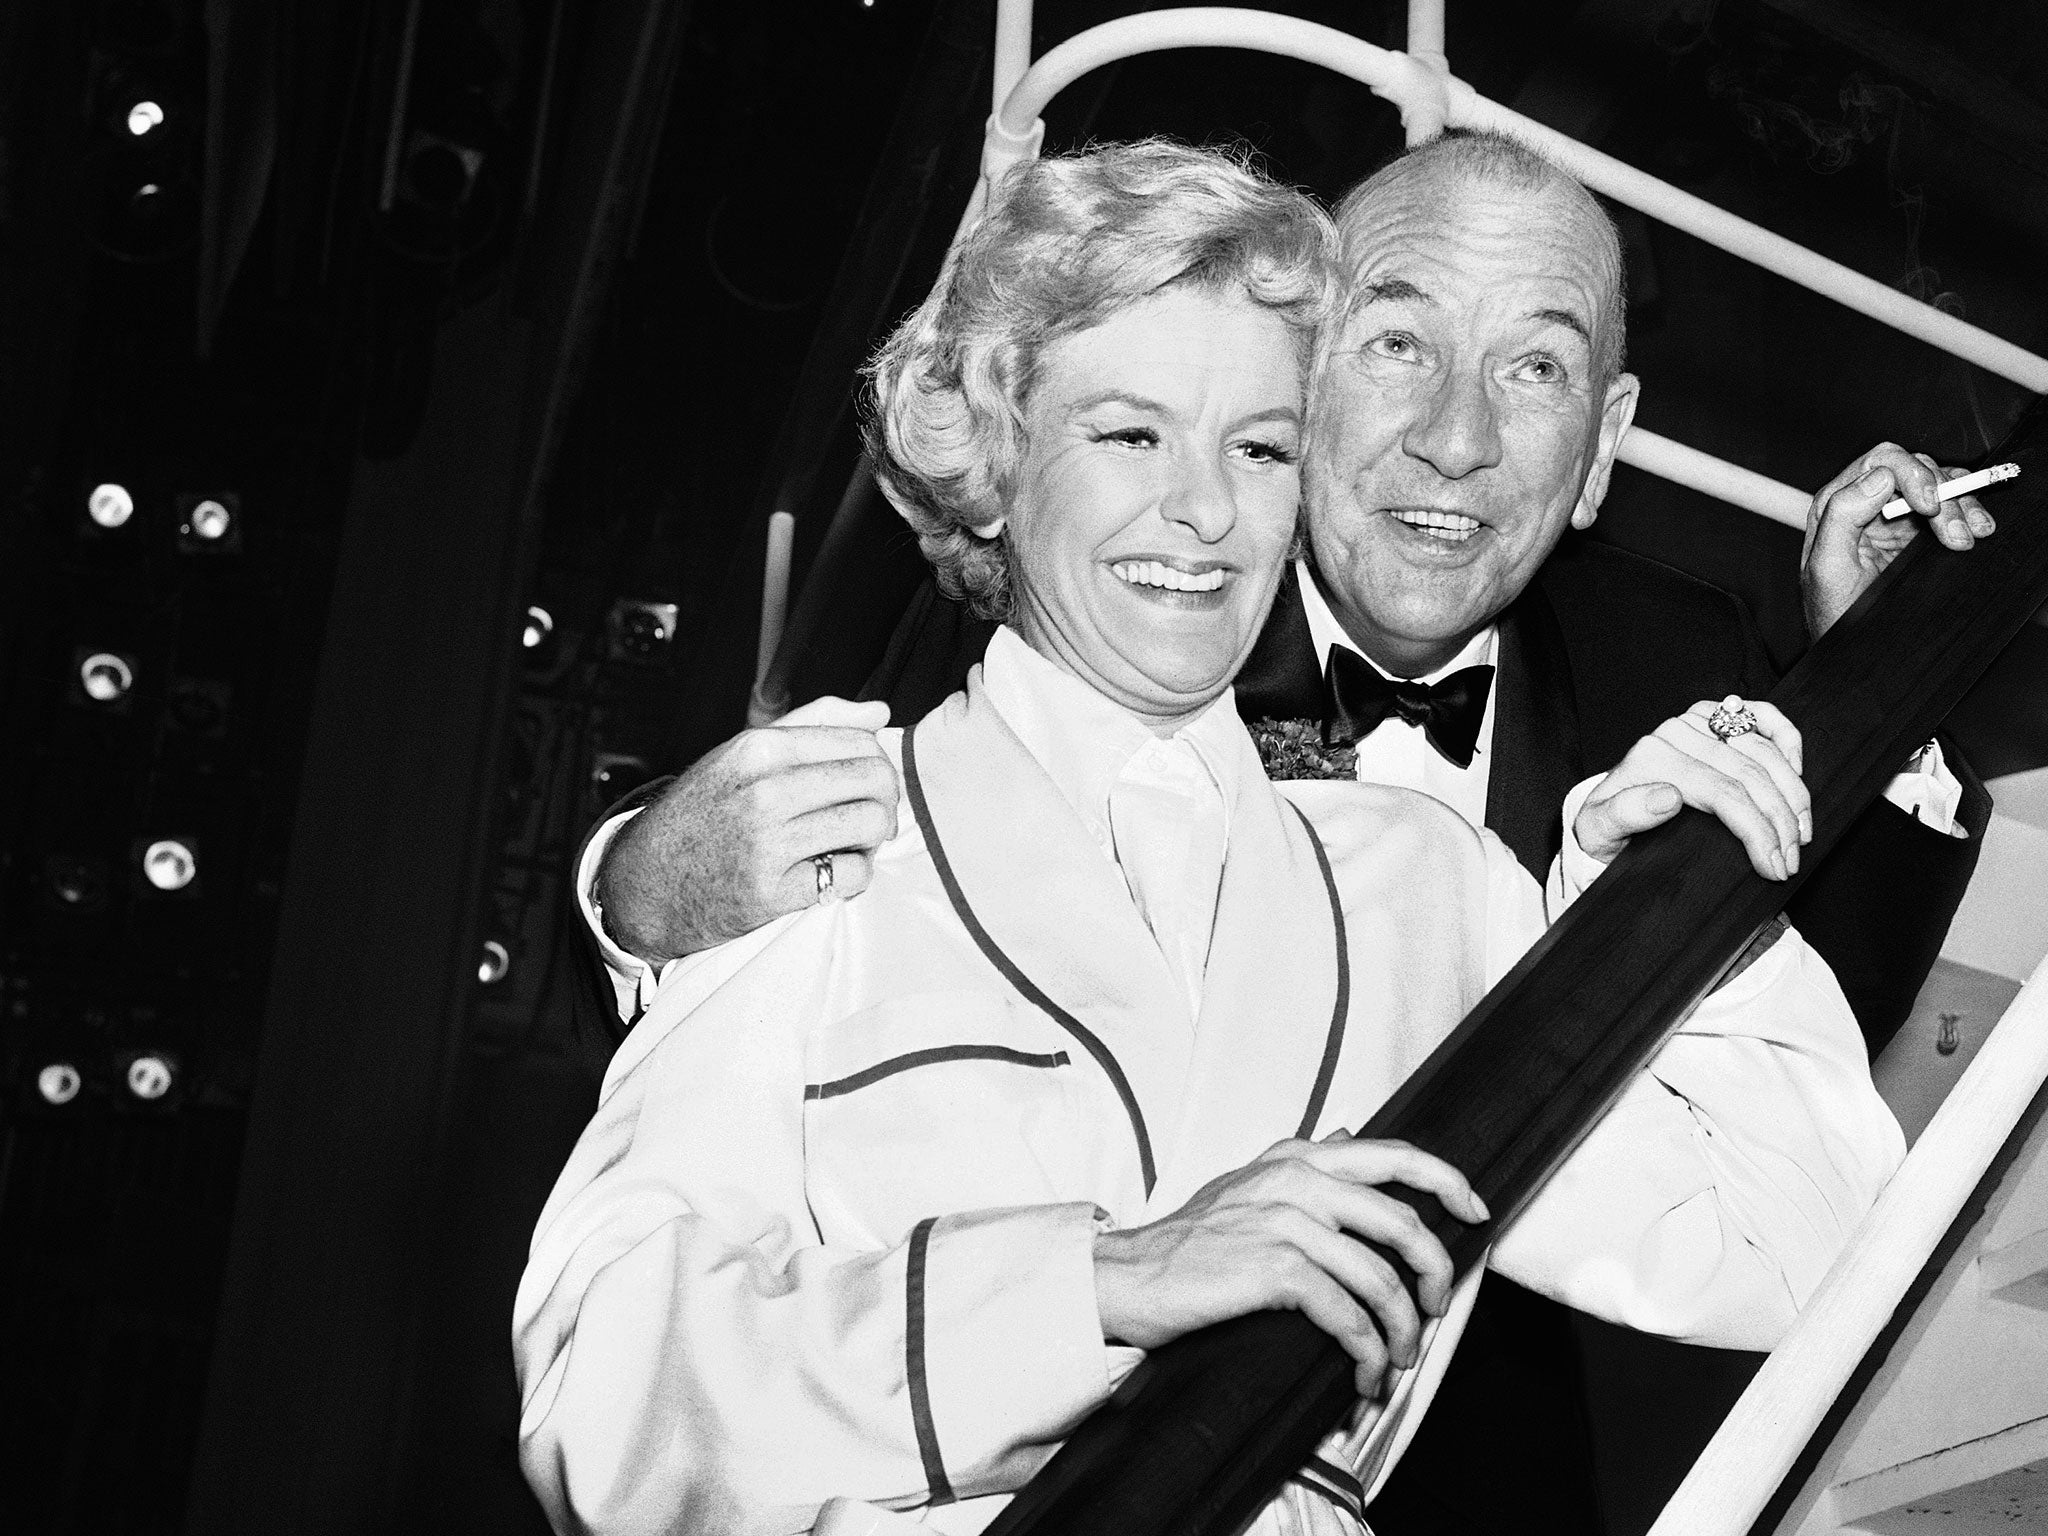 Stritch and Noël Coward backstage after the Broadway opening of ‘Sail Away’ in 1961; he wrote the part of Mimi Paragon for her